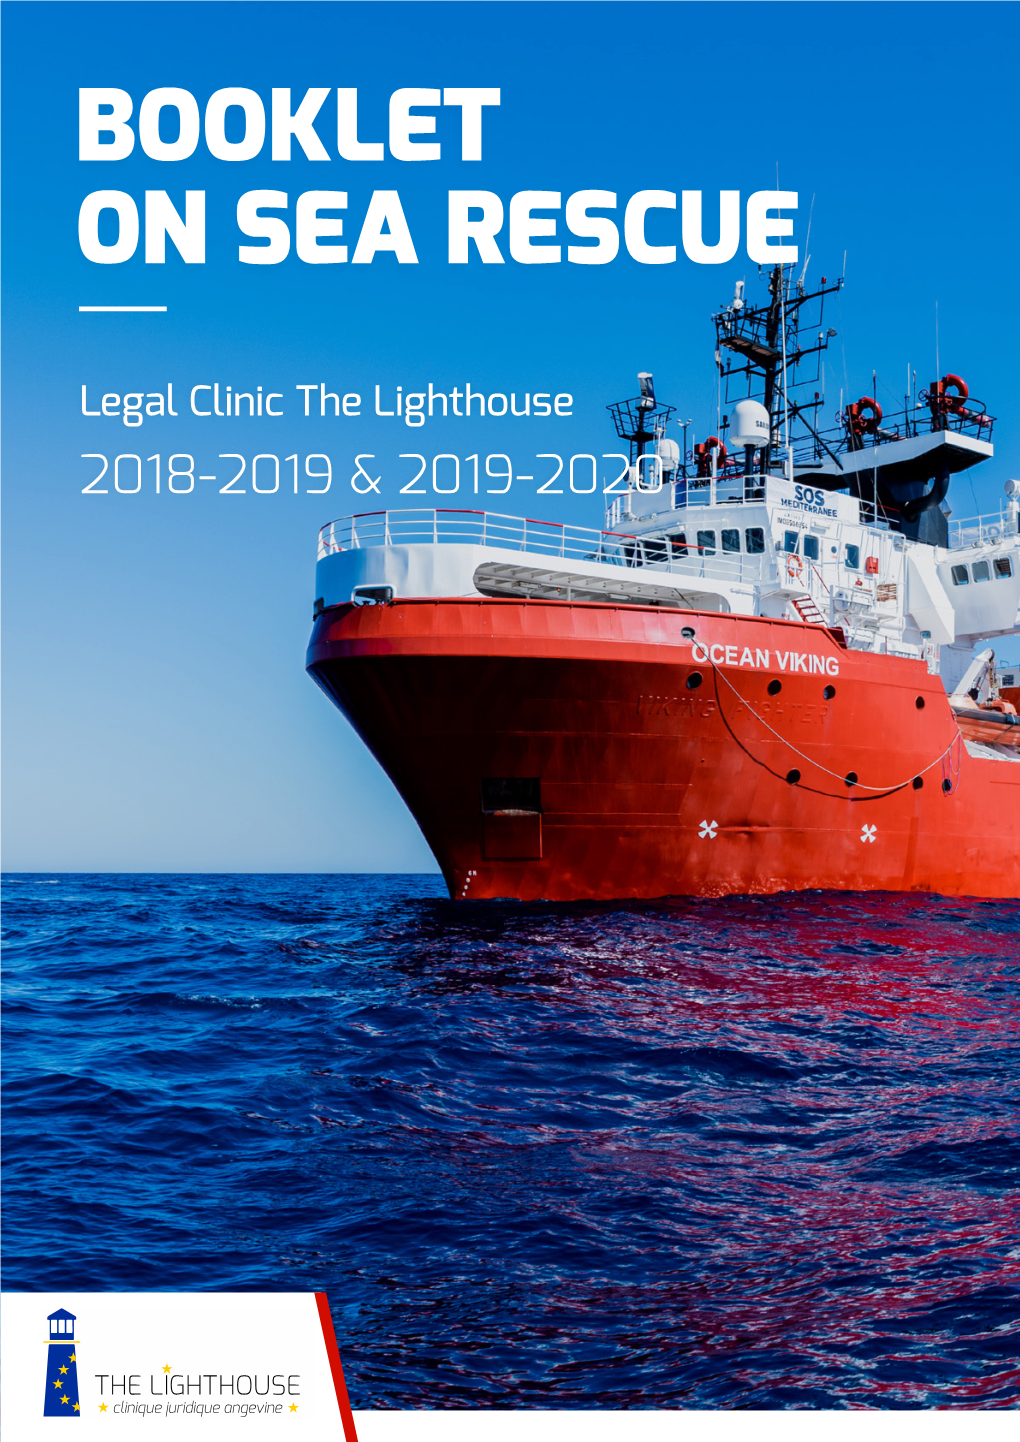 Booklet on Sea Rescue